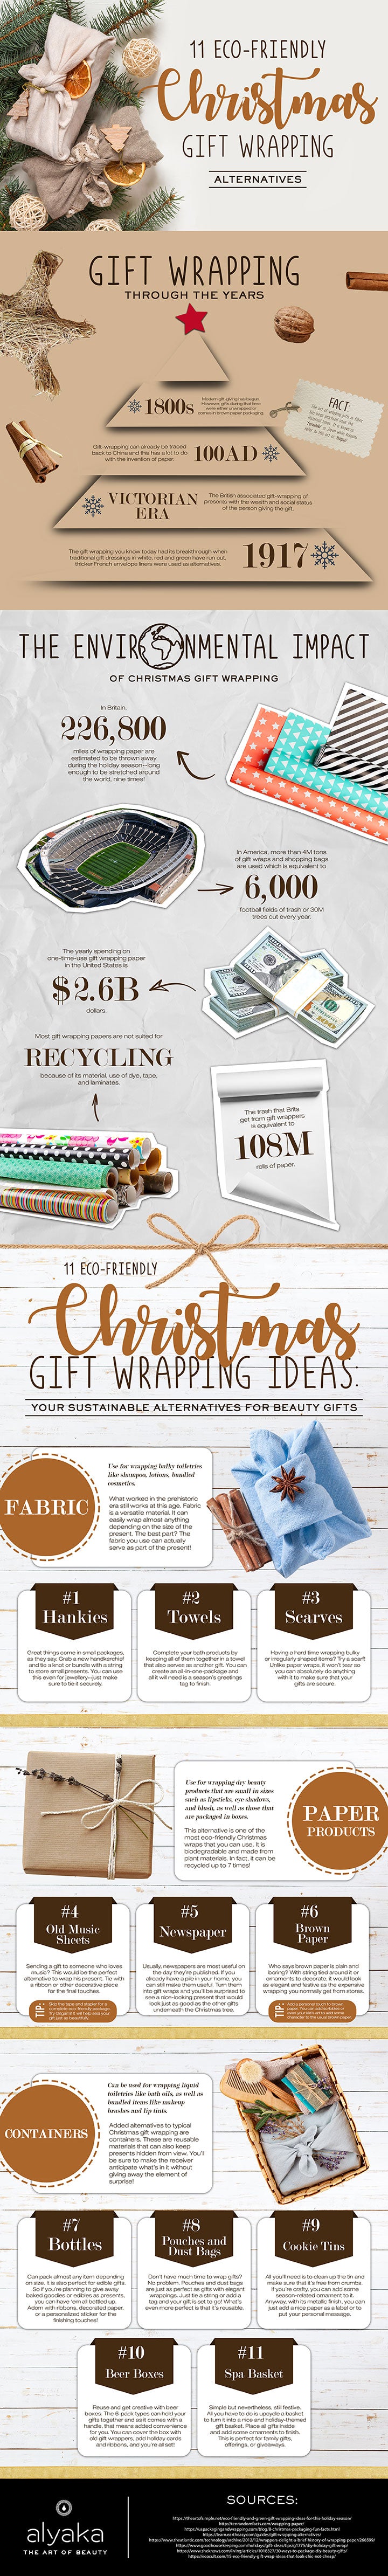 Make Your Own Christmas Wrapping Paper! - Beauty Through Imperfection